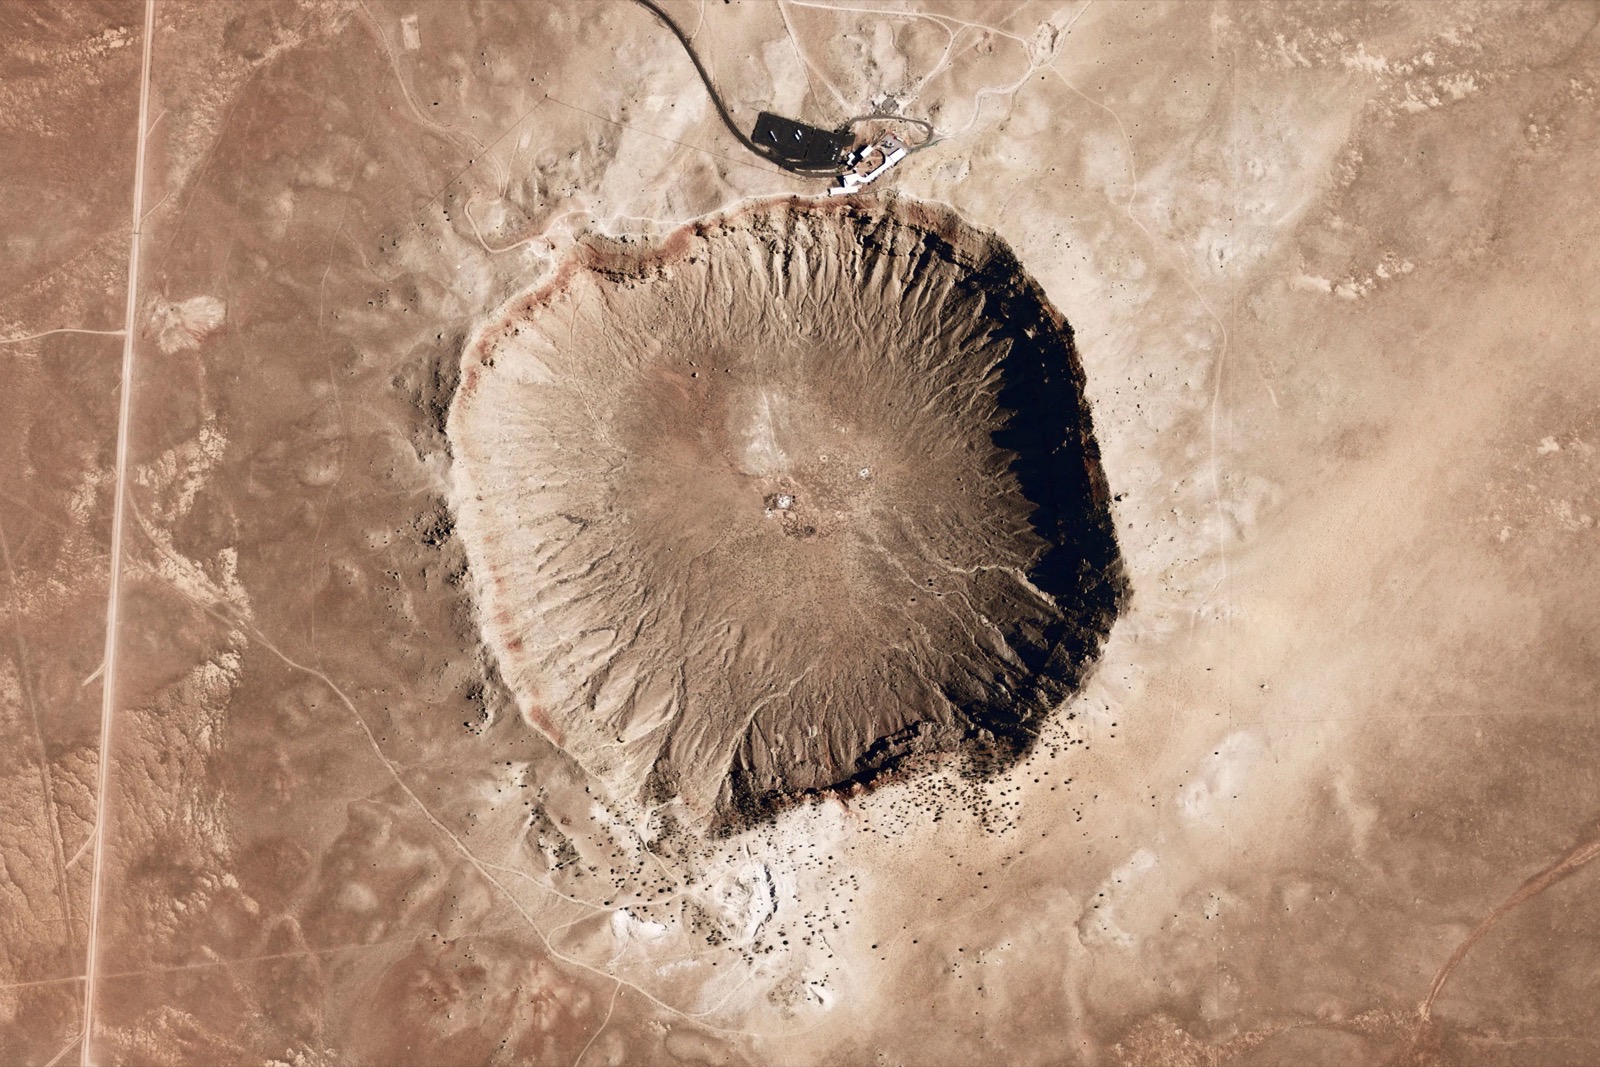 🔭 Are You Intelligent Enough to Pass This Challenging Science Quiz? Let’s Find Out Earth Crater